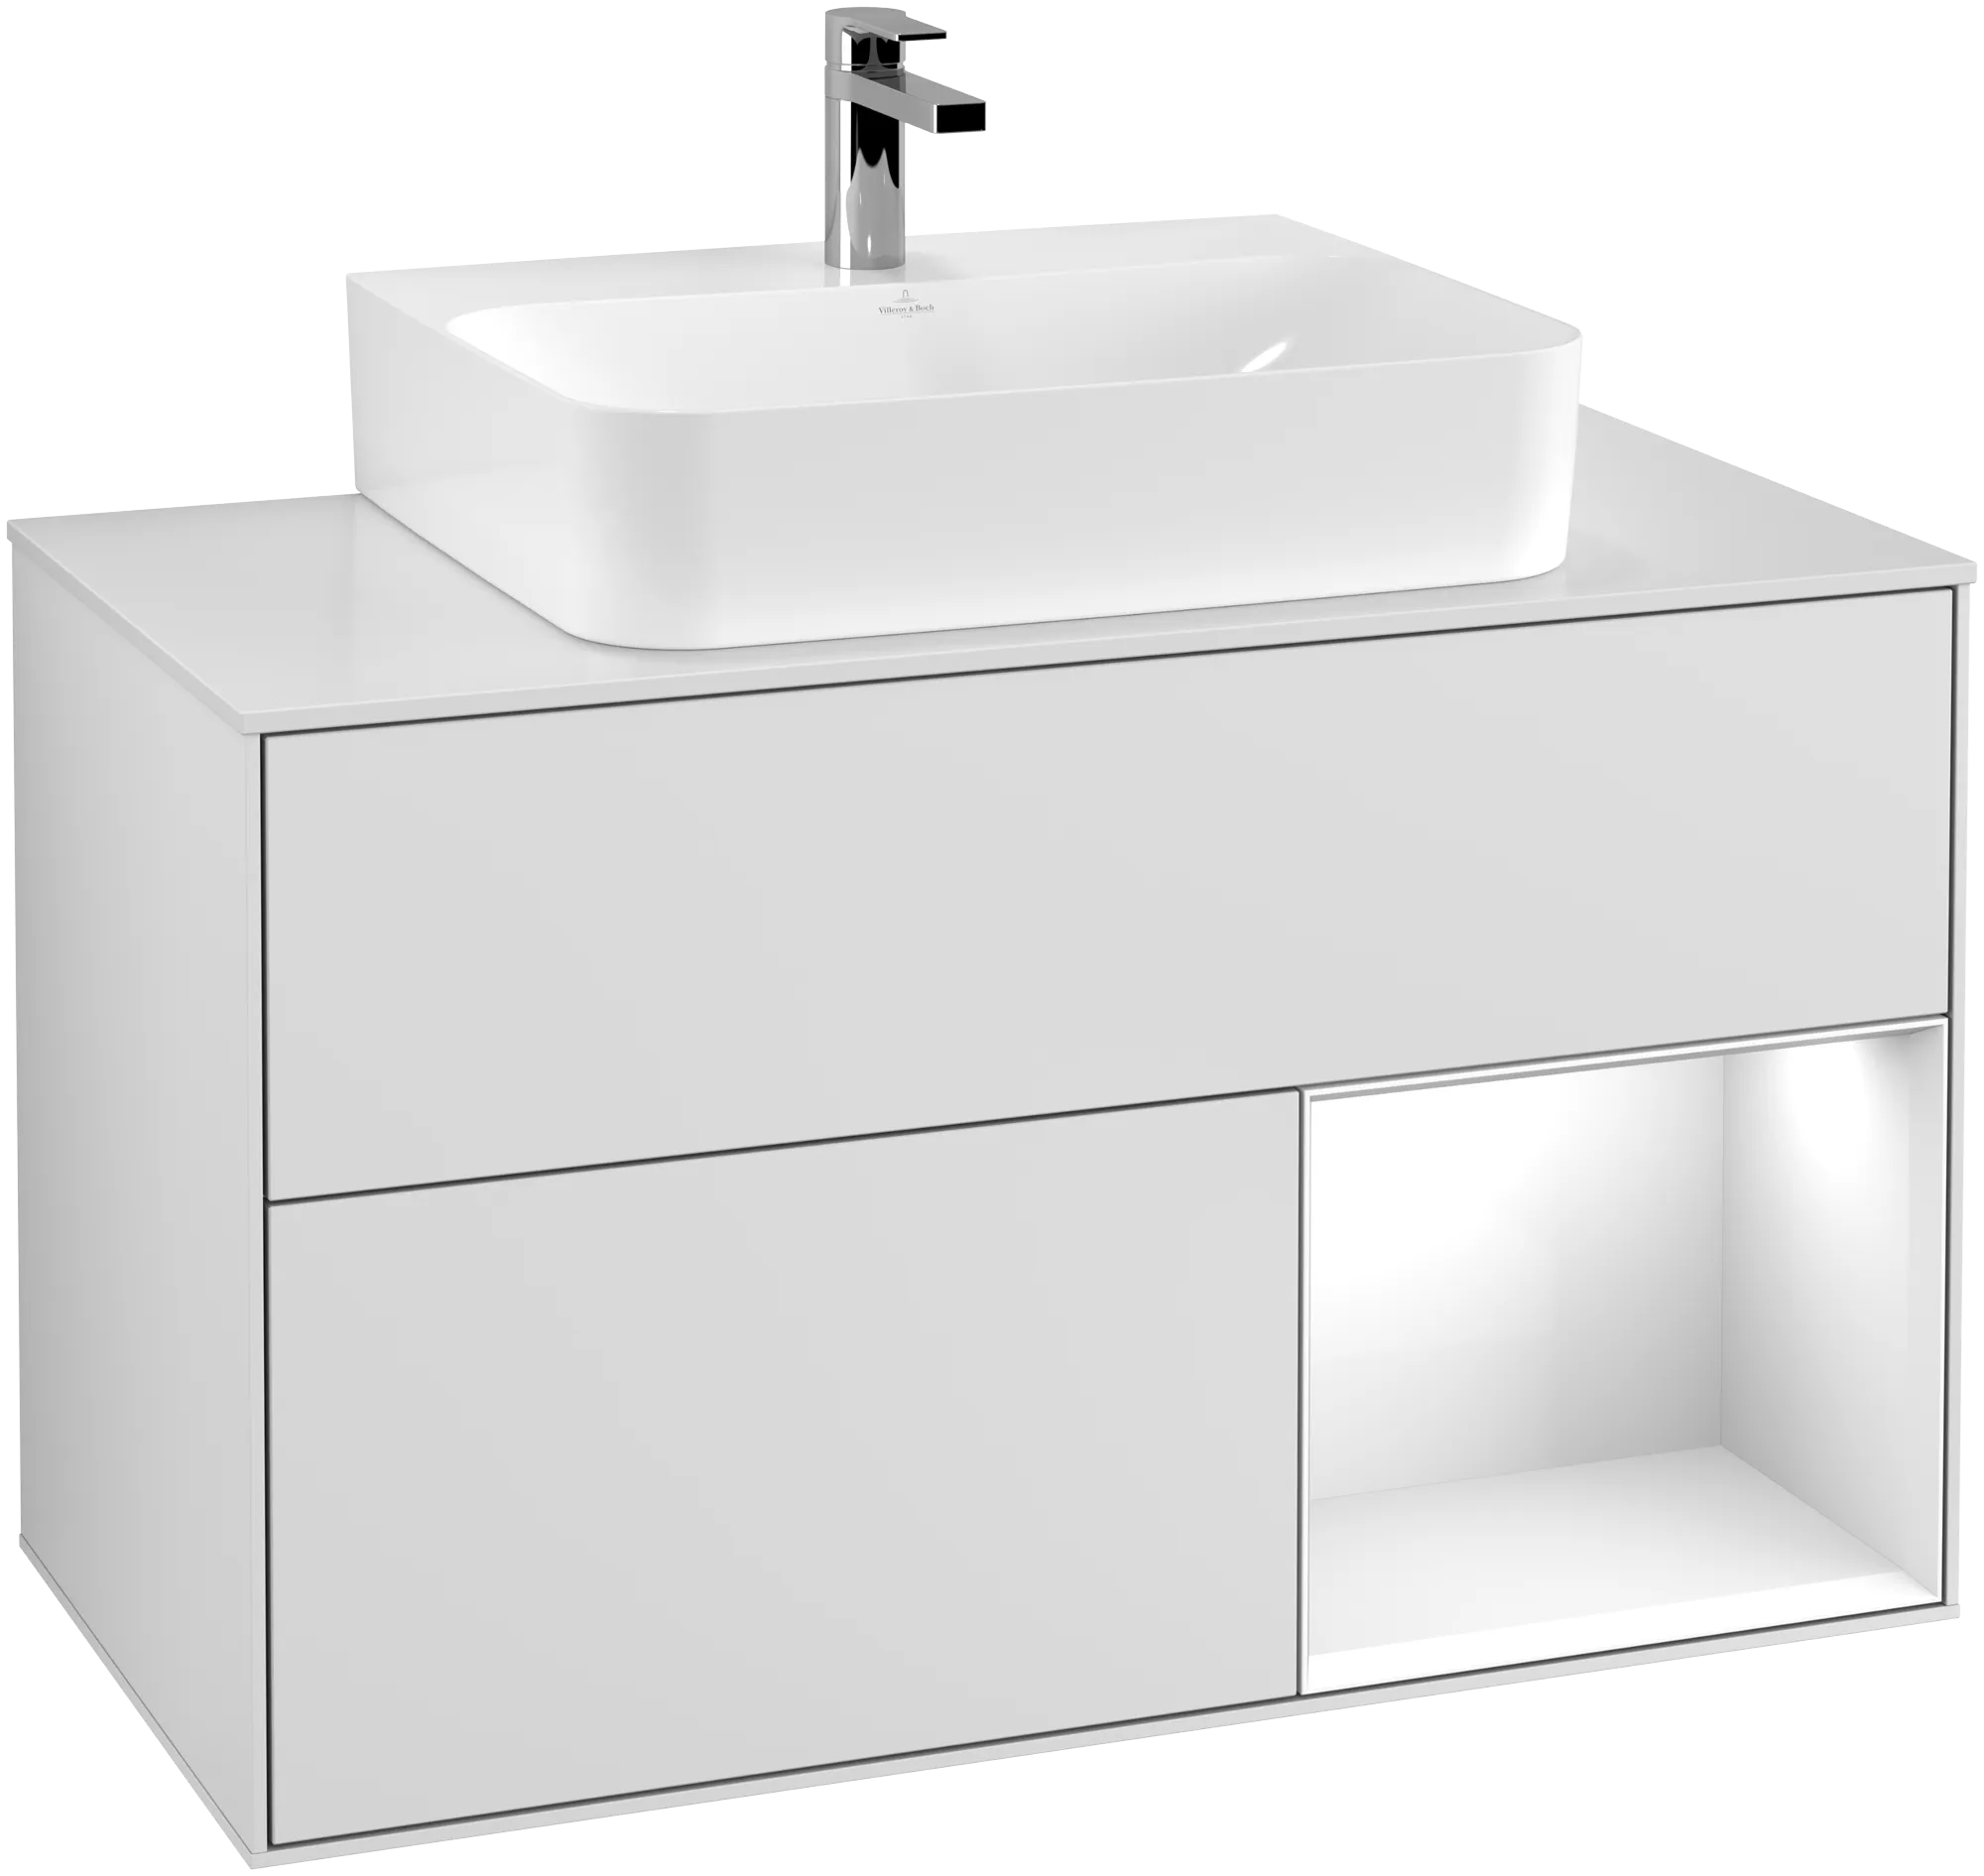 Obrázek VILLEROY BOCH Finion Vanity unit, with lighting, 2 pull-out compartments, 1000 x 603 x 501 mm, White Matt Lacquer / Glossy White Lacquer / Glass White Matt #G121GFMT